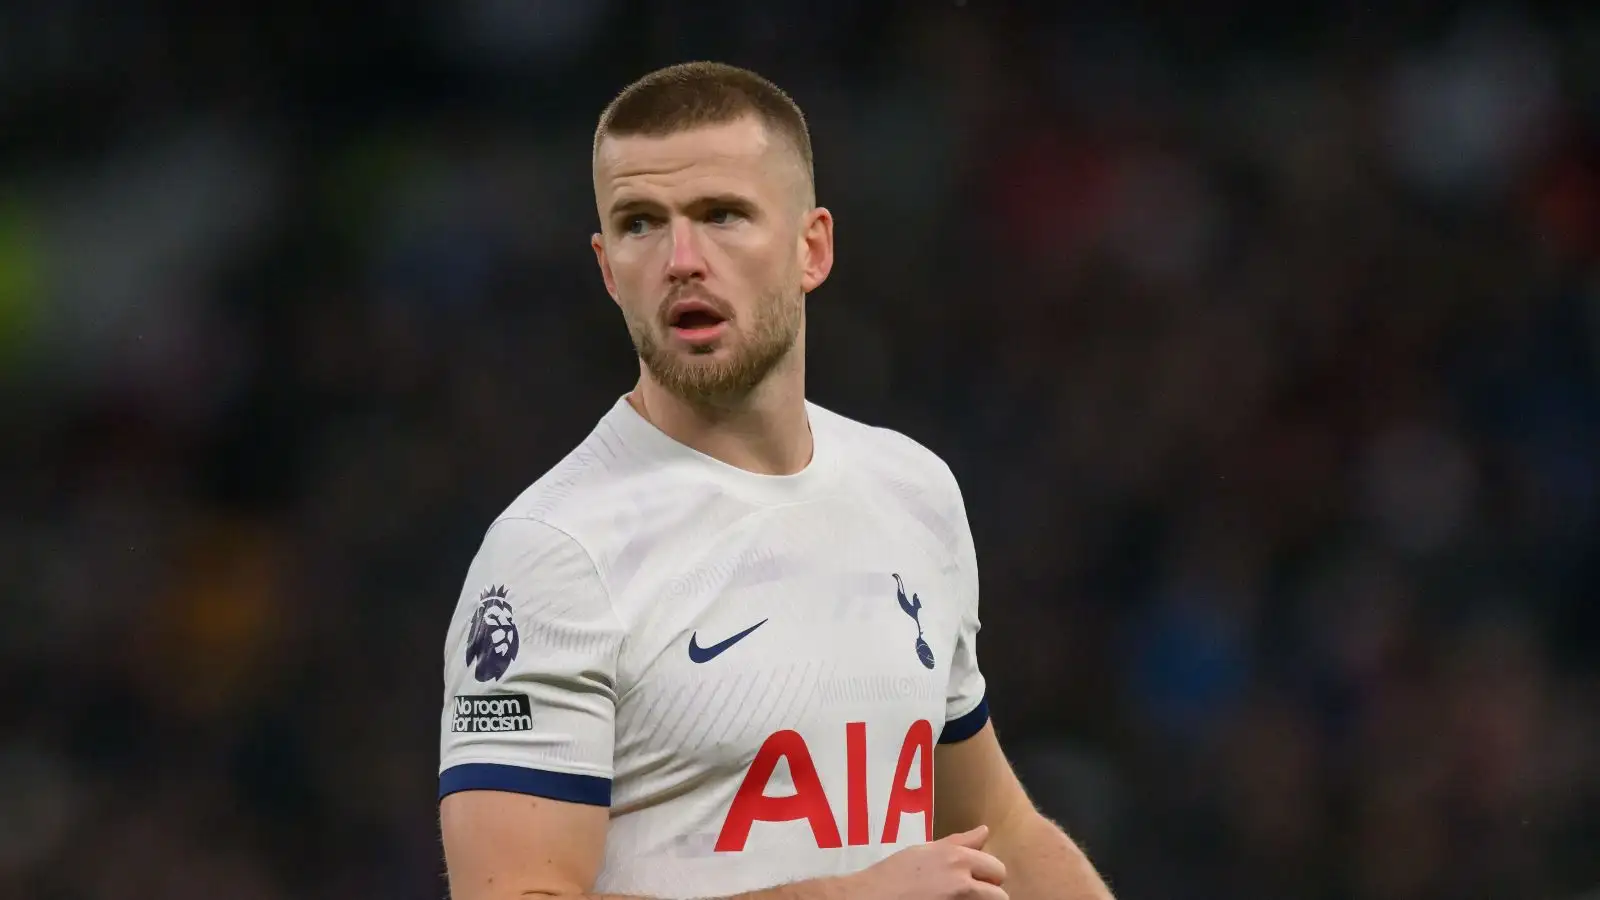 Tottenham transfer: Fee for player confirmed as €0 with defender only joining for six months